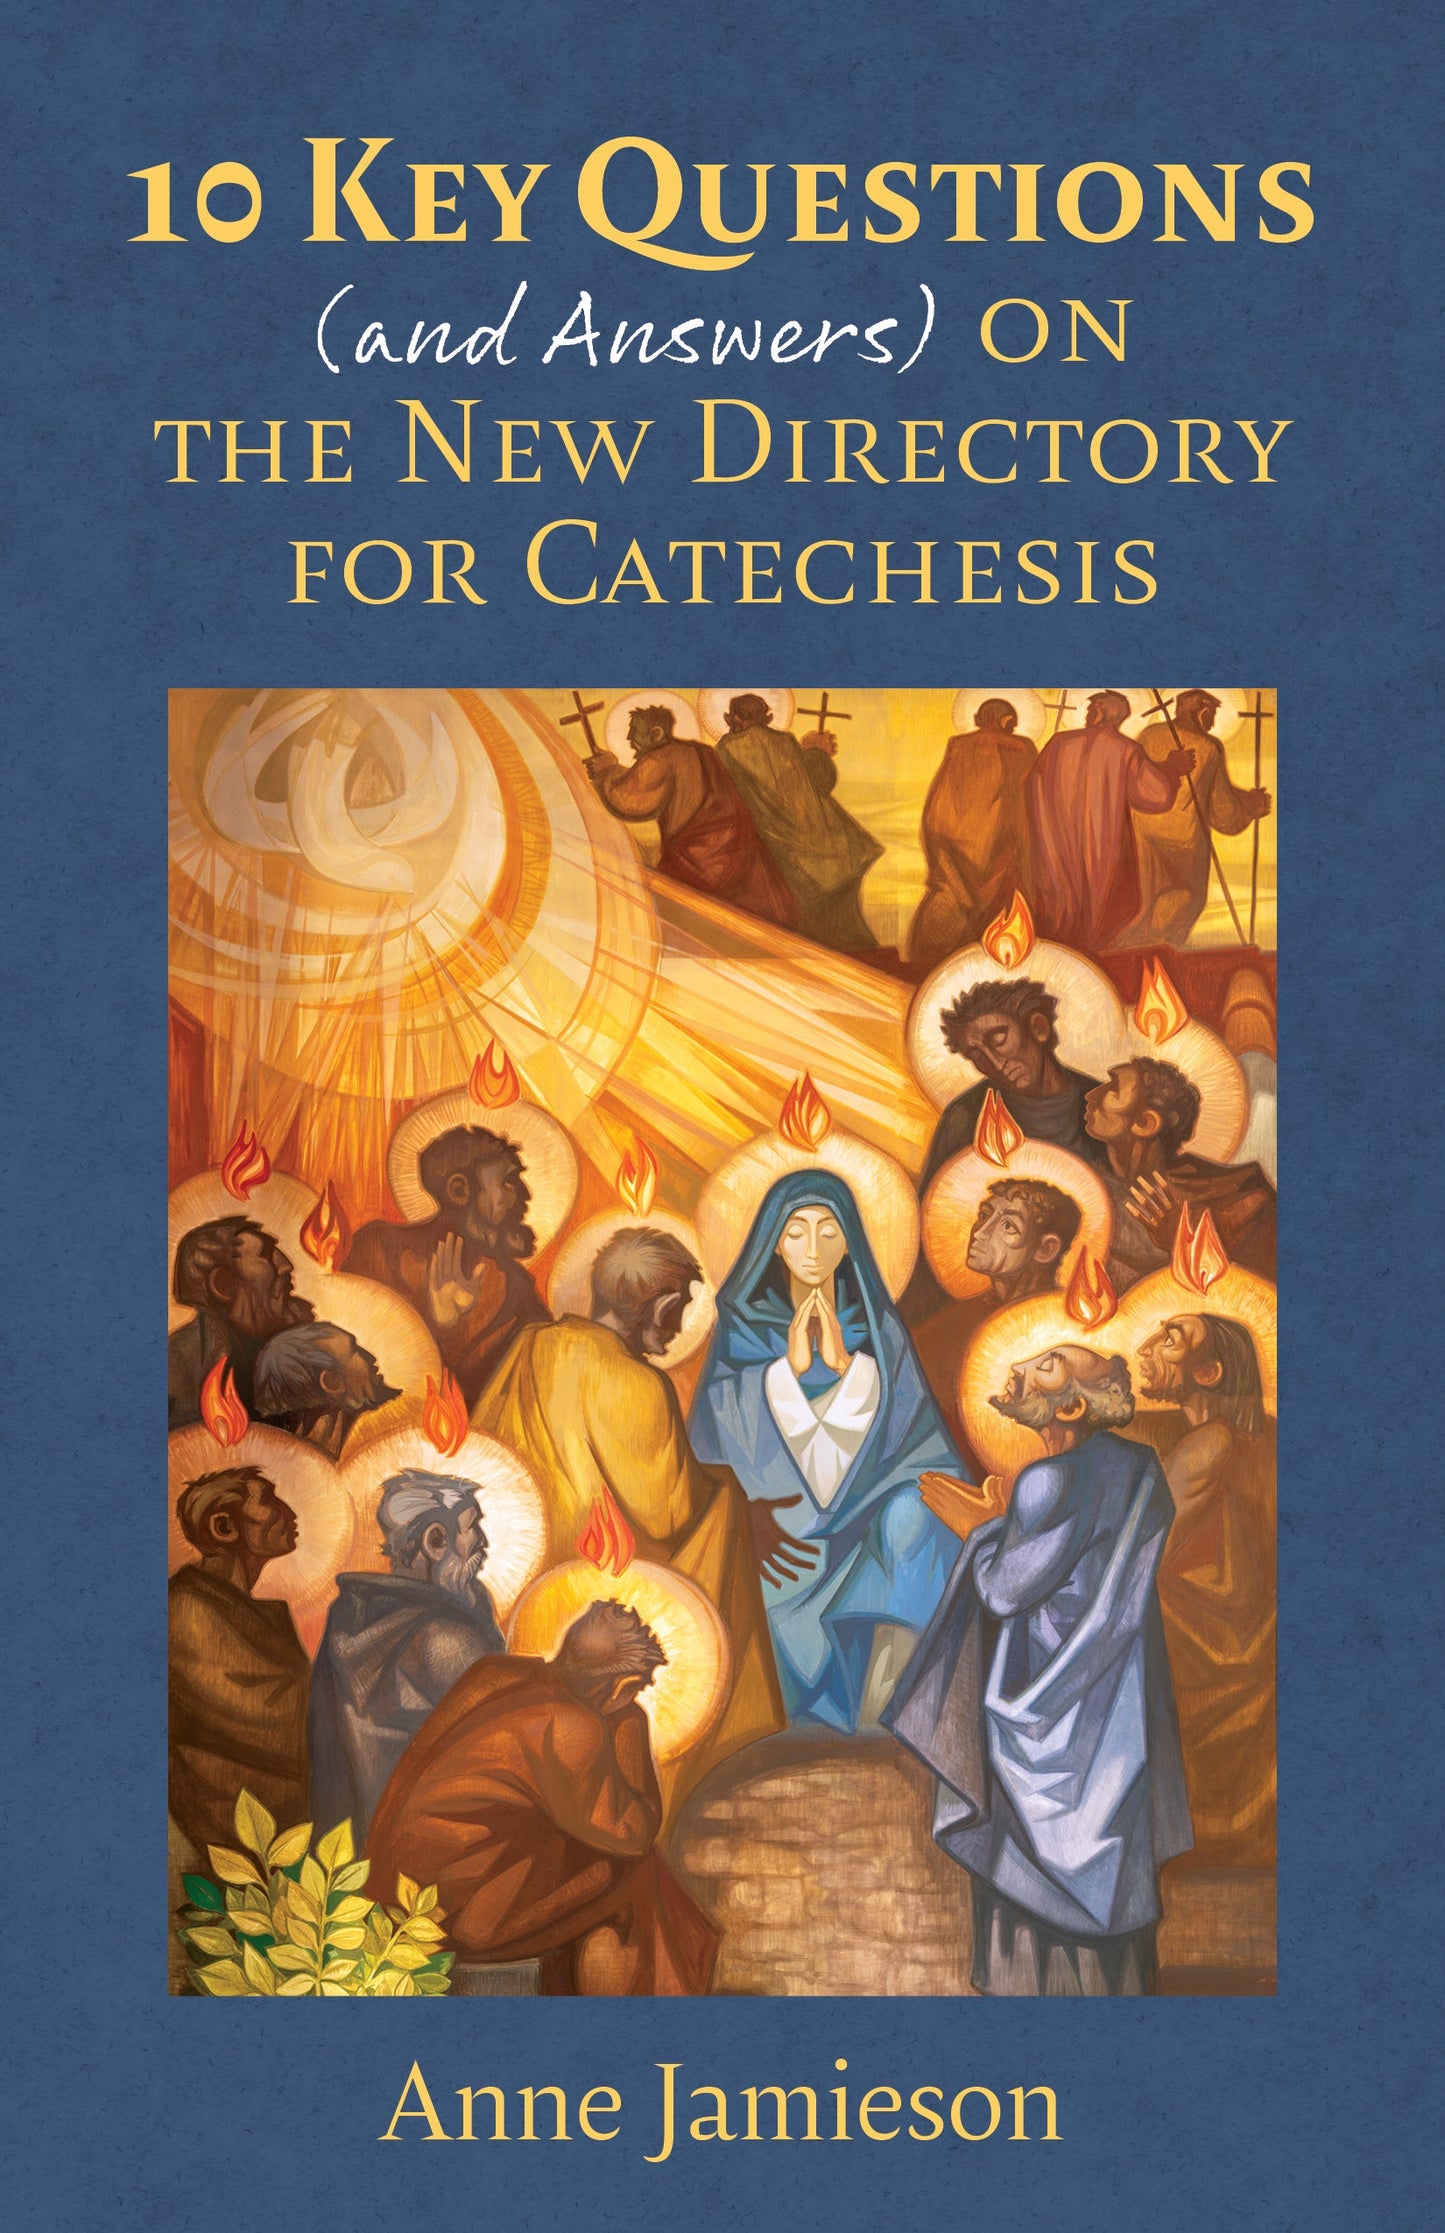 10 Key Questions (and Answers) on the New Directory for Catechesis